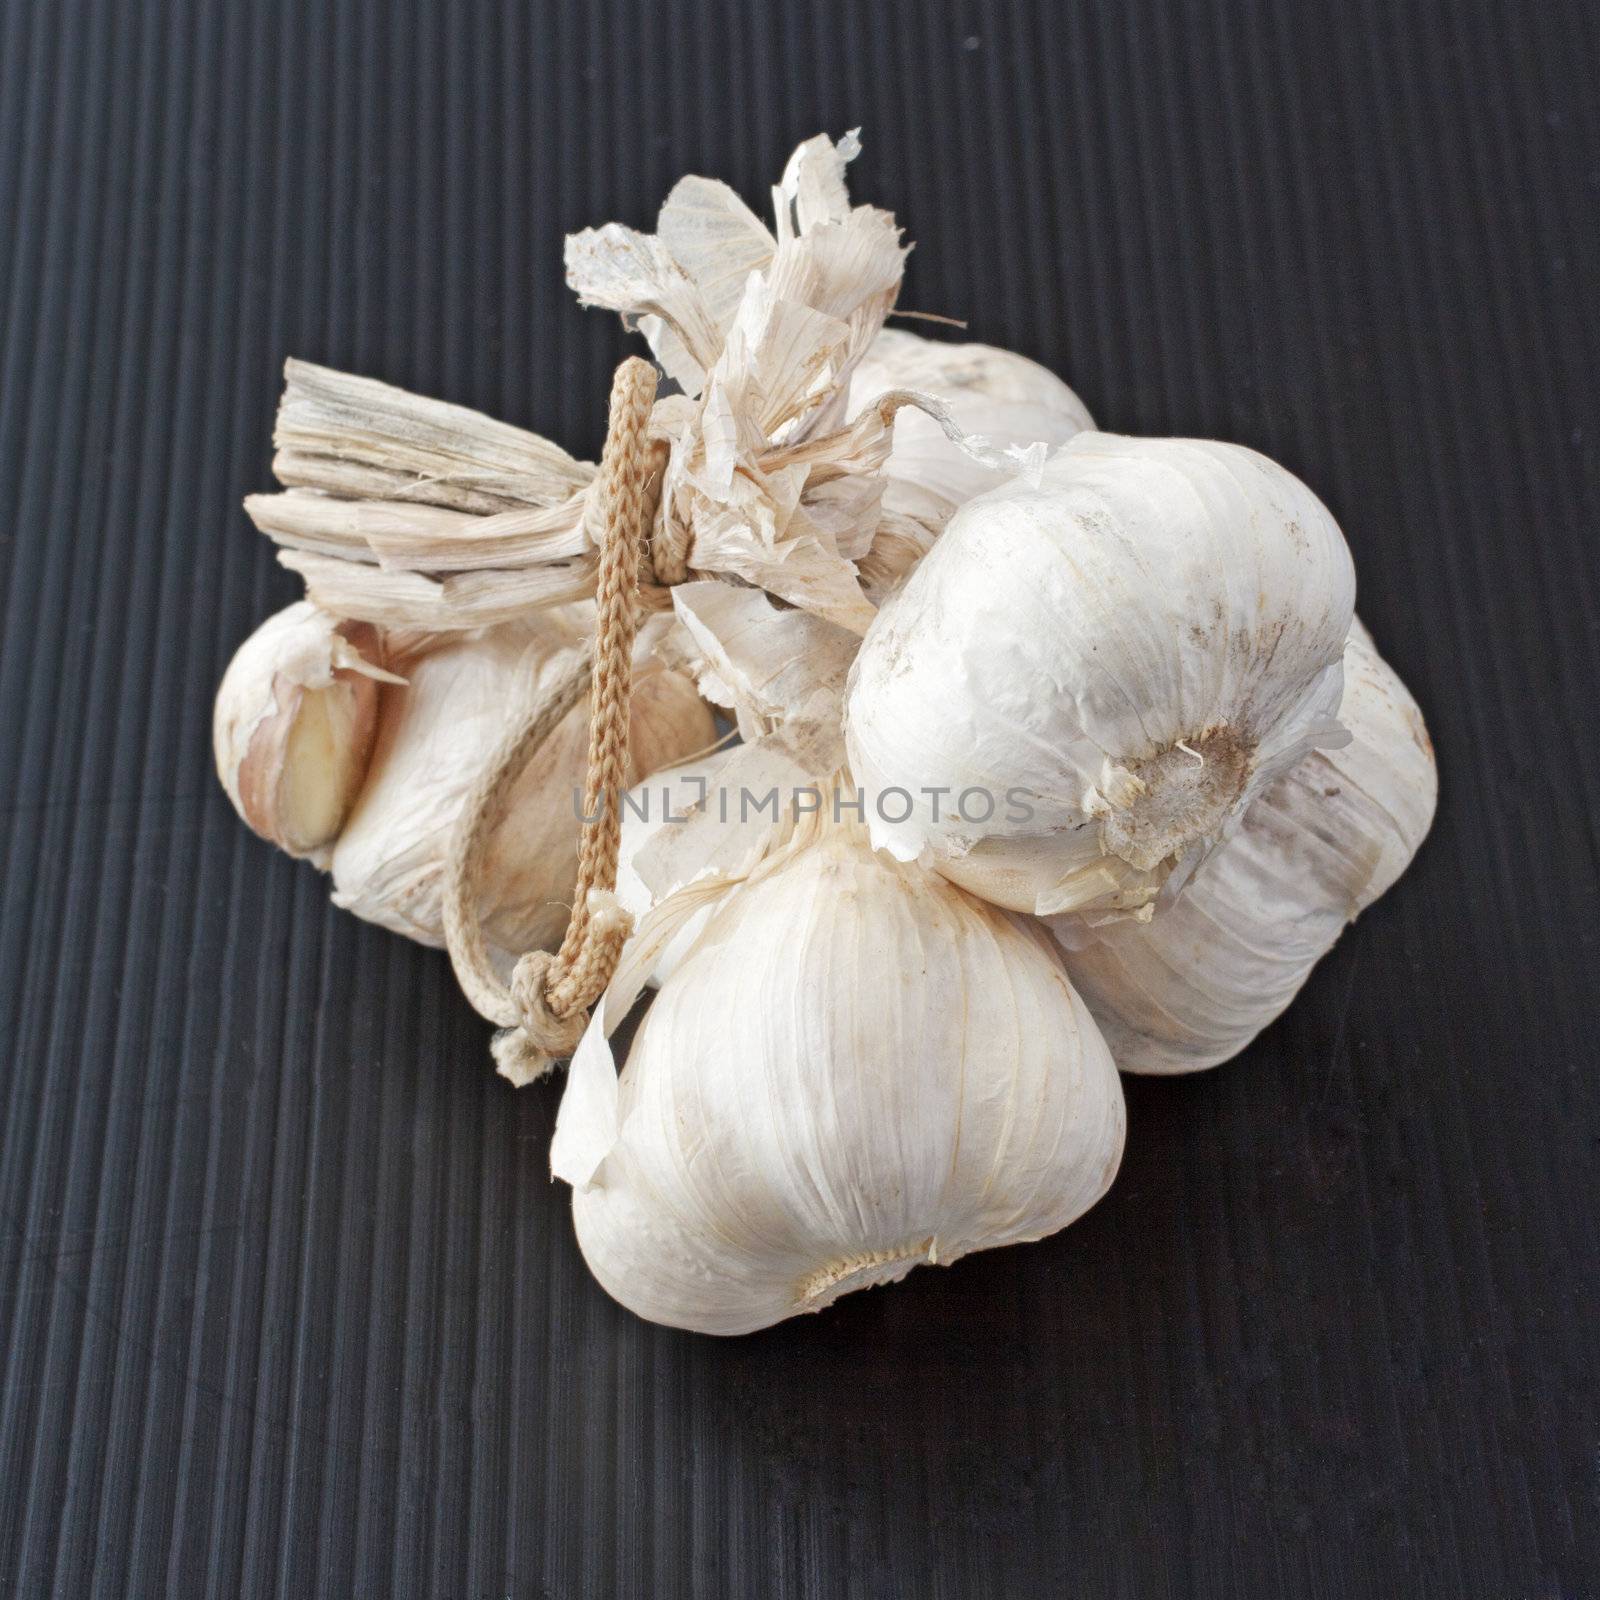 Some garlic heads over a black background